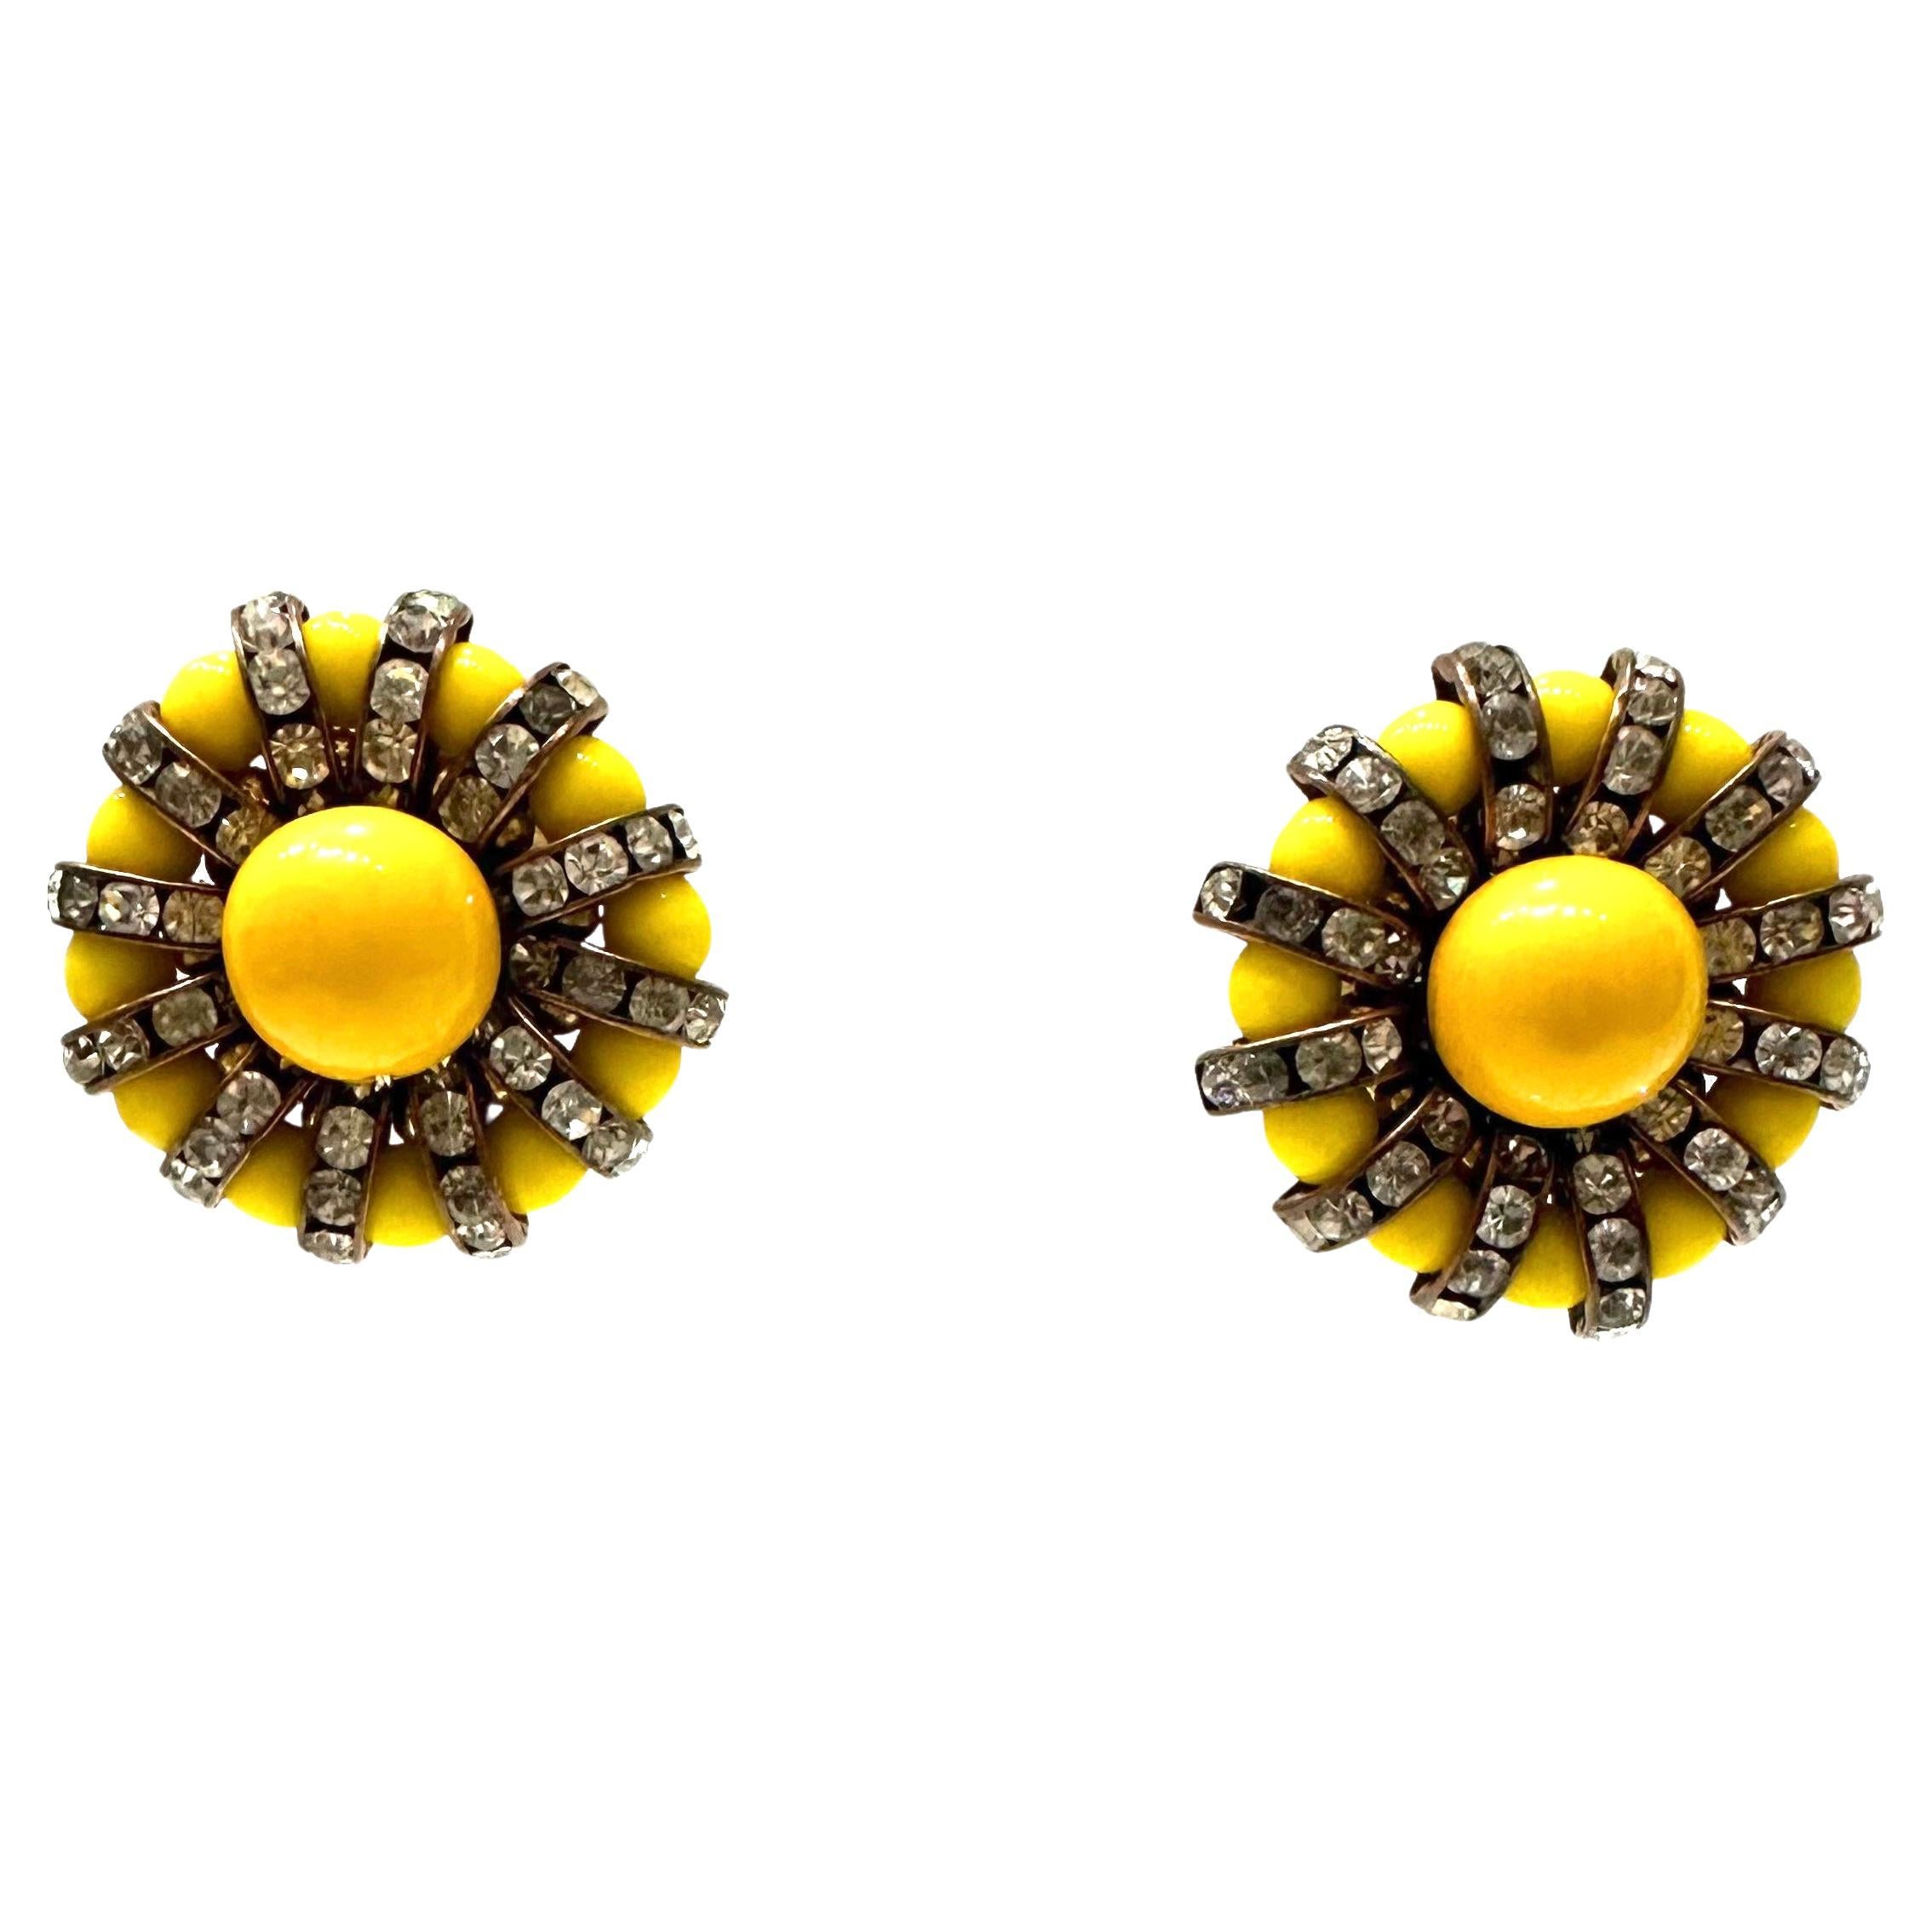 Handmade glass cabochons and Swarovski crystal rondelles on gold metal. 
Francoise Montague took over the De Saurma jewelry workshop in the late 1940s. Her mother founded the workshop in 1945, according to 